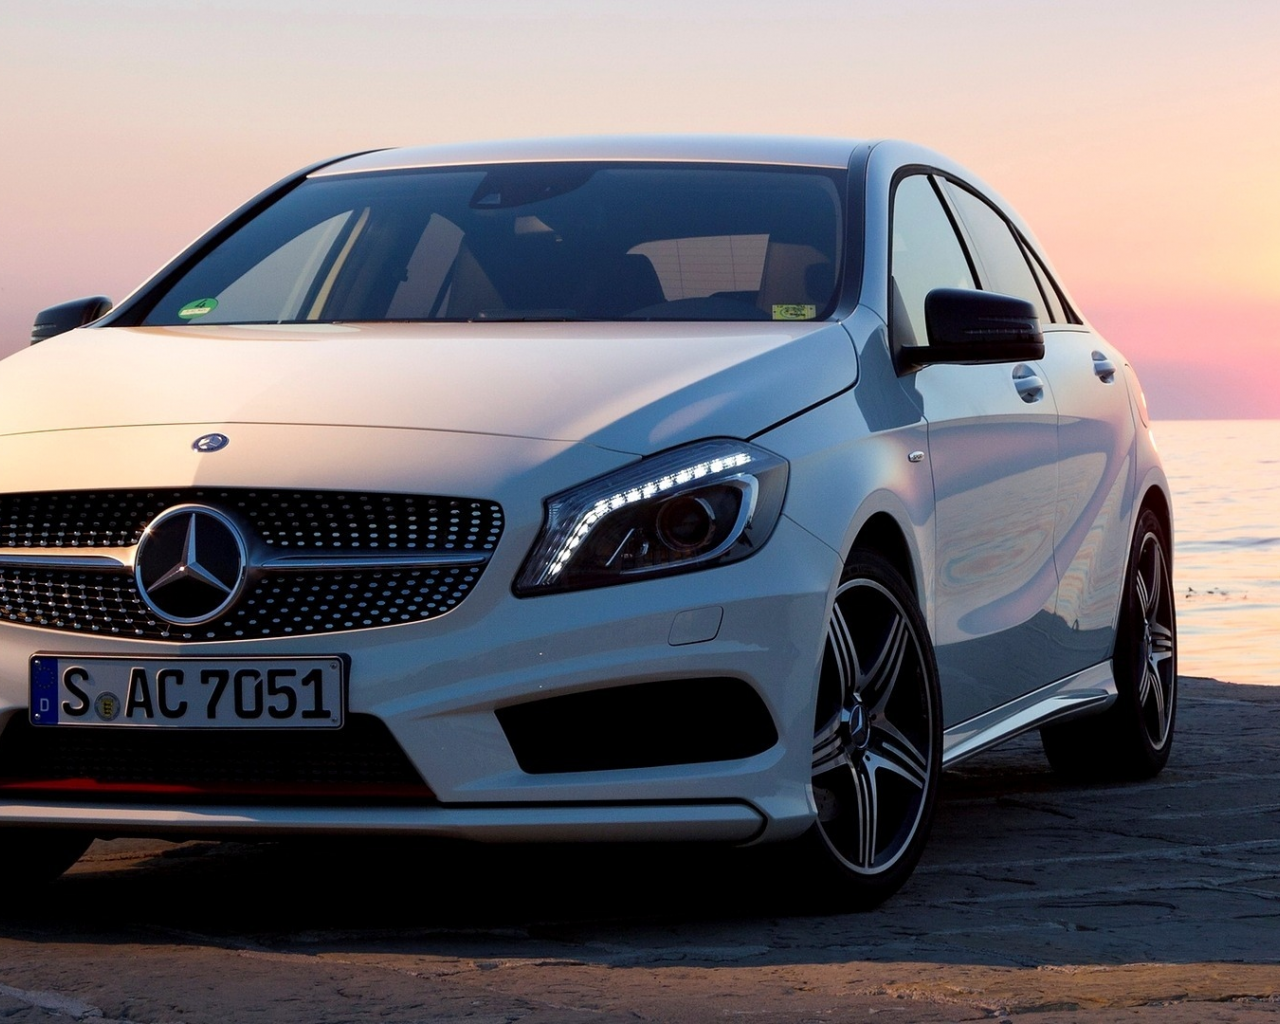 sport, a200, amg, 2012, wallpapers, Car, автомобиль, new, mercedes, package, white